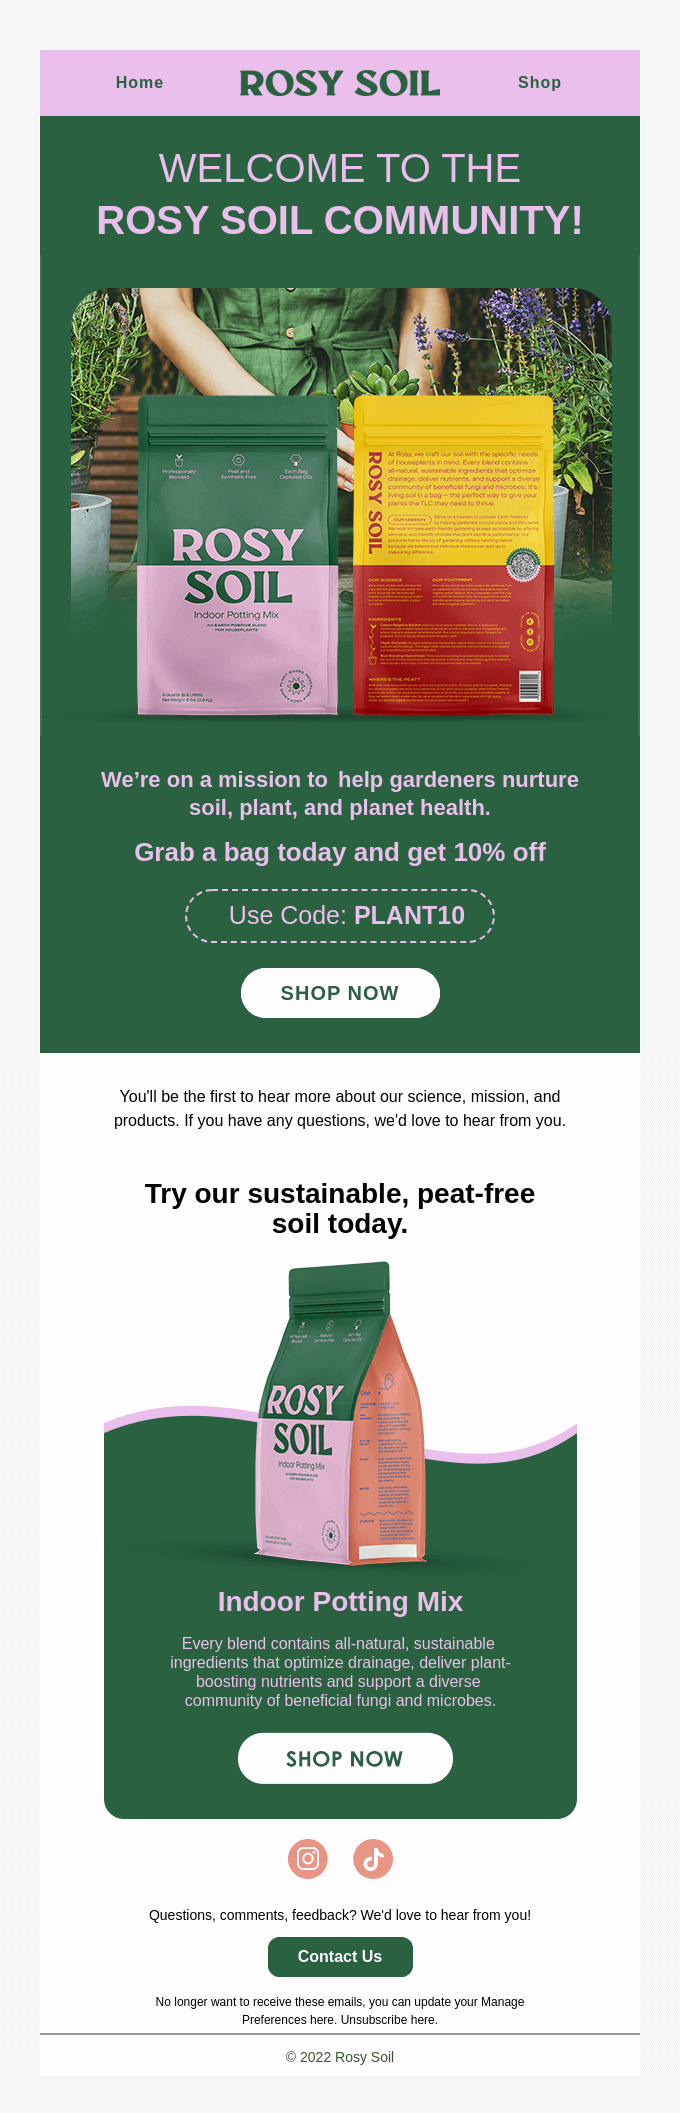 A welcome email from Rosy Soil offering a newcomer’s discount